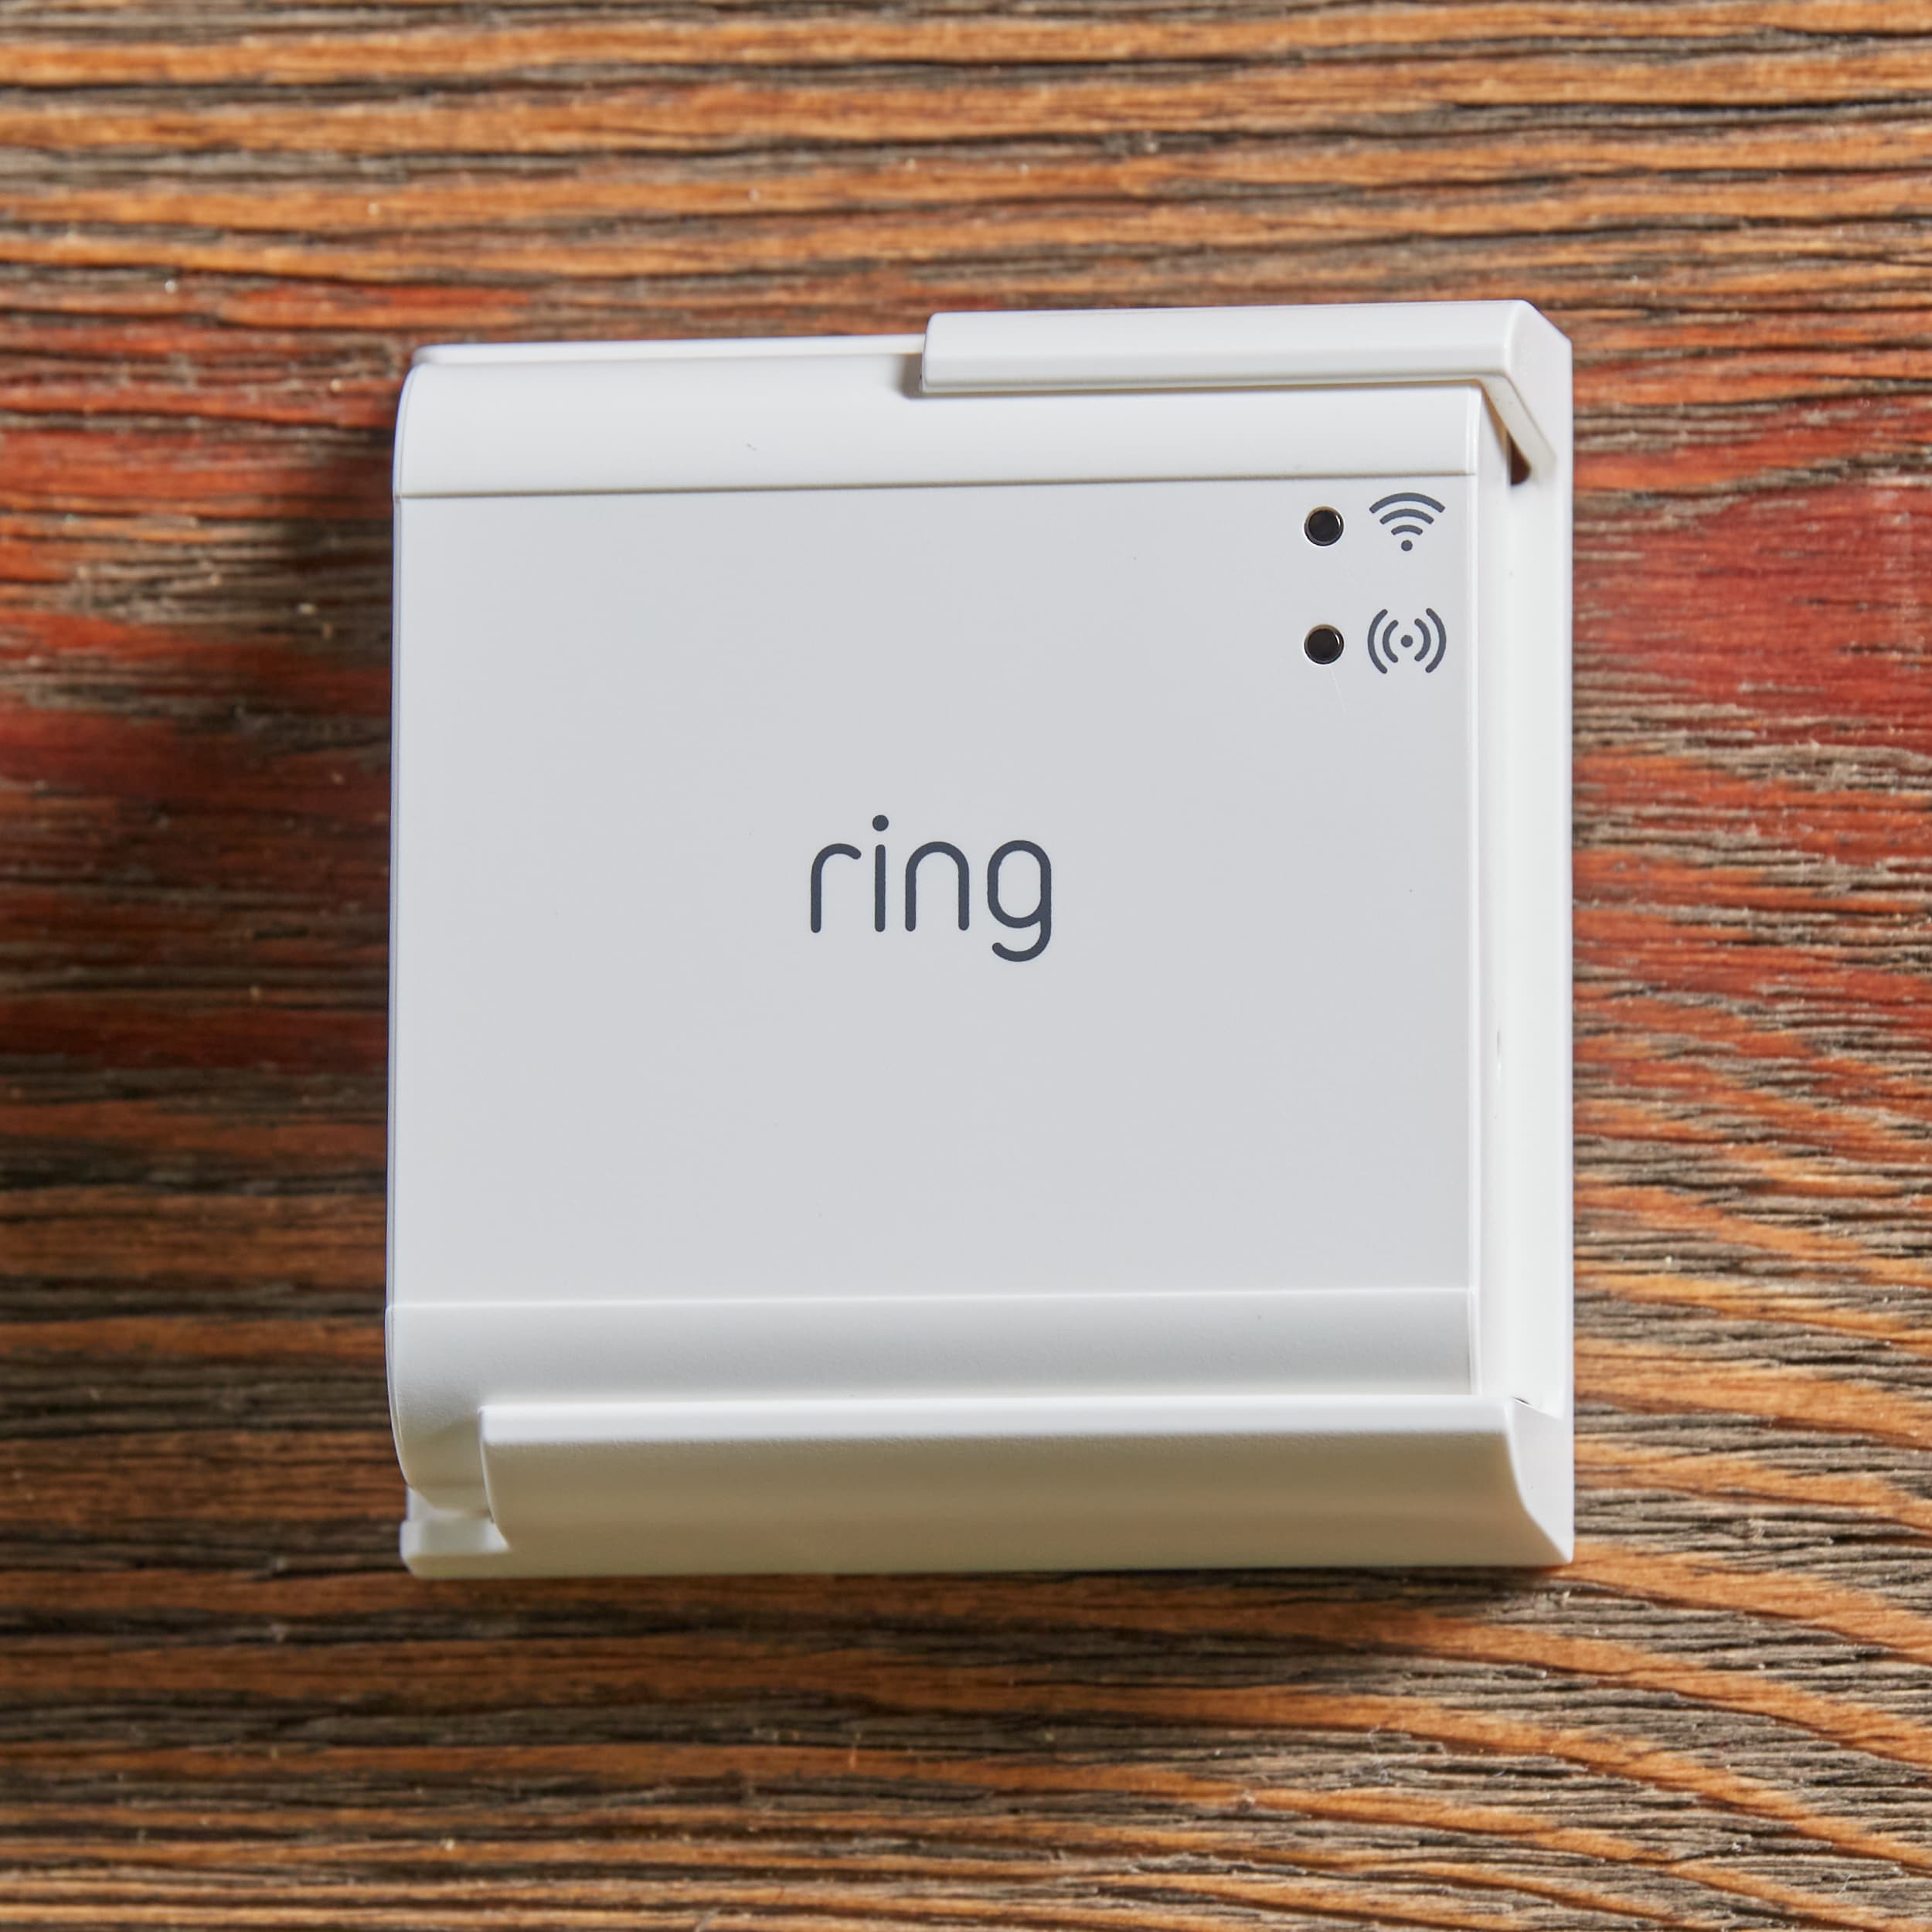 Smart Lighting that Works With Ring